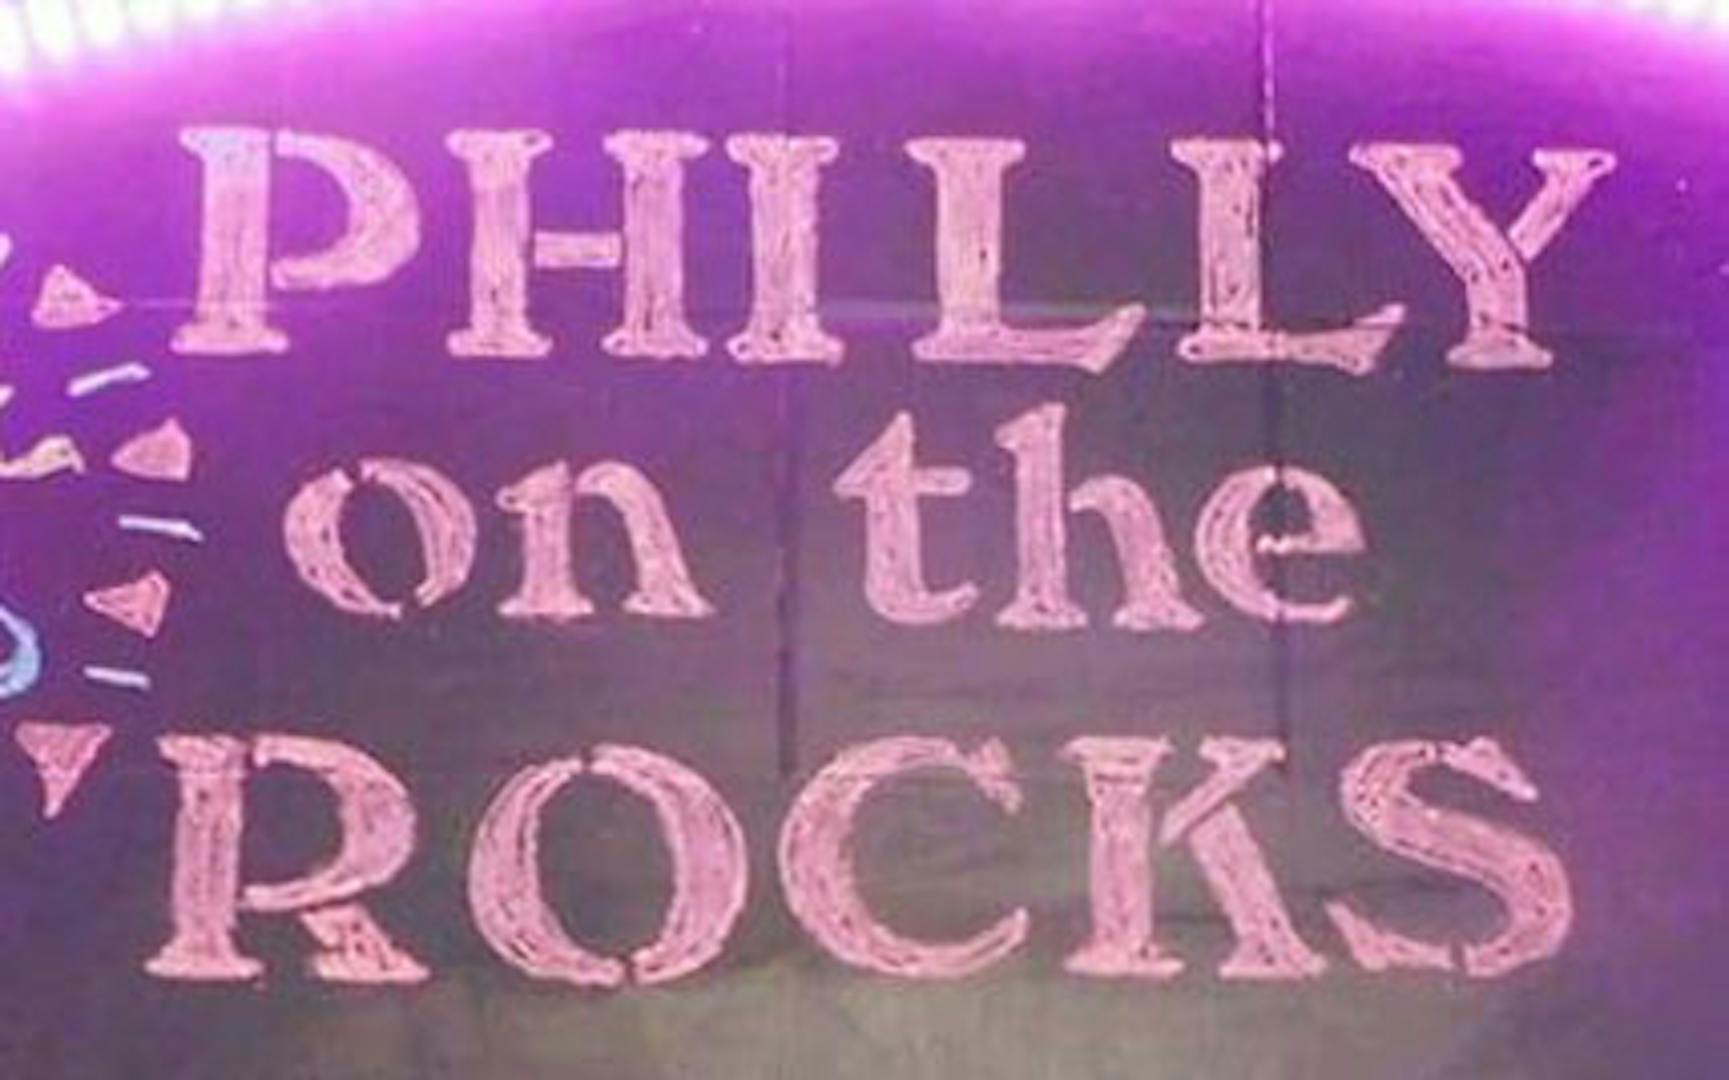 Philly on the Rocks